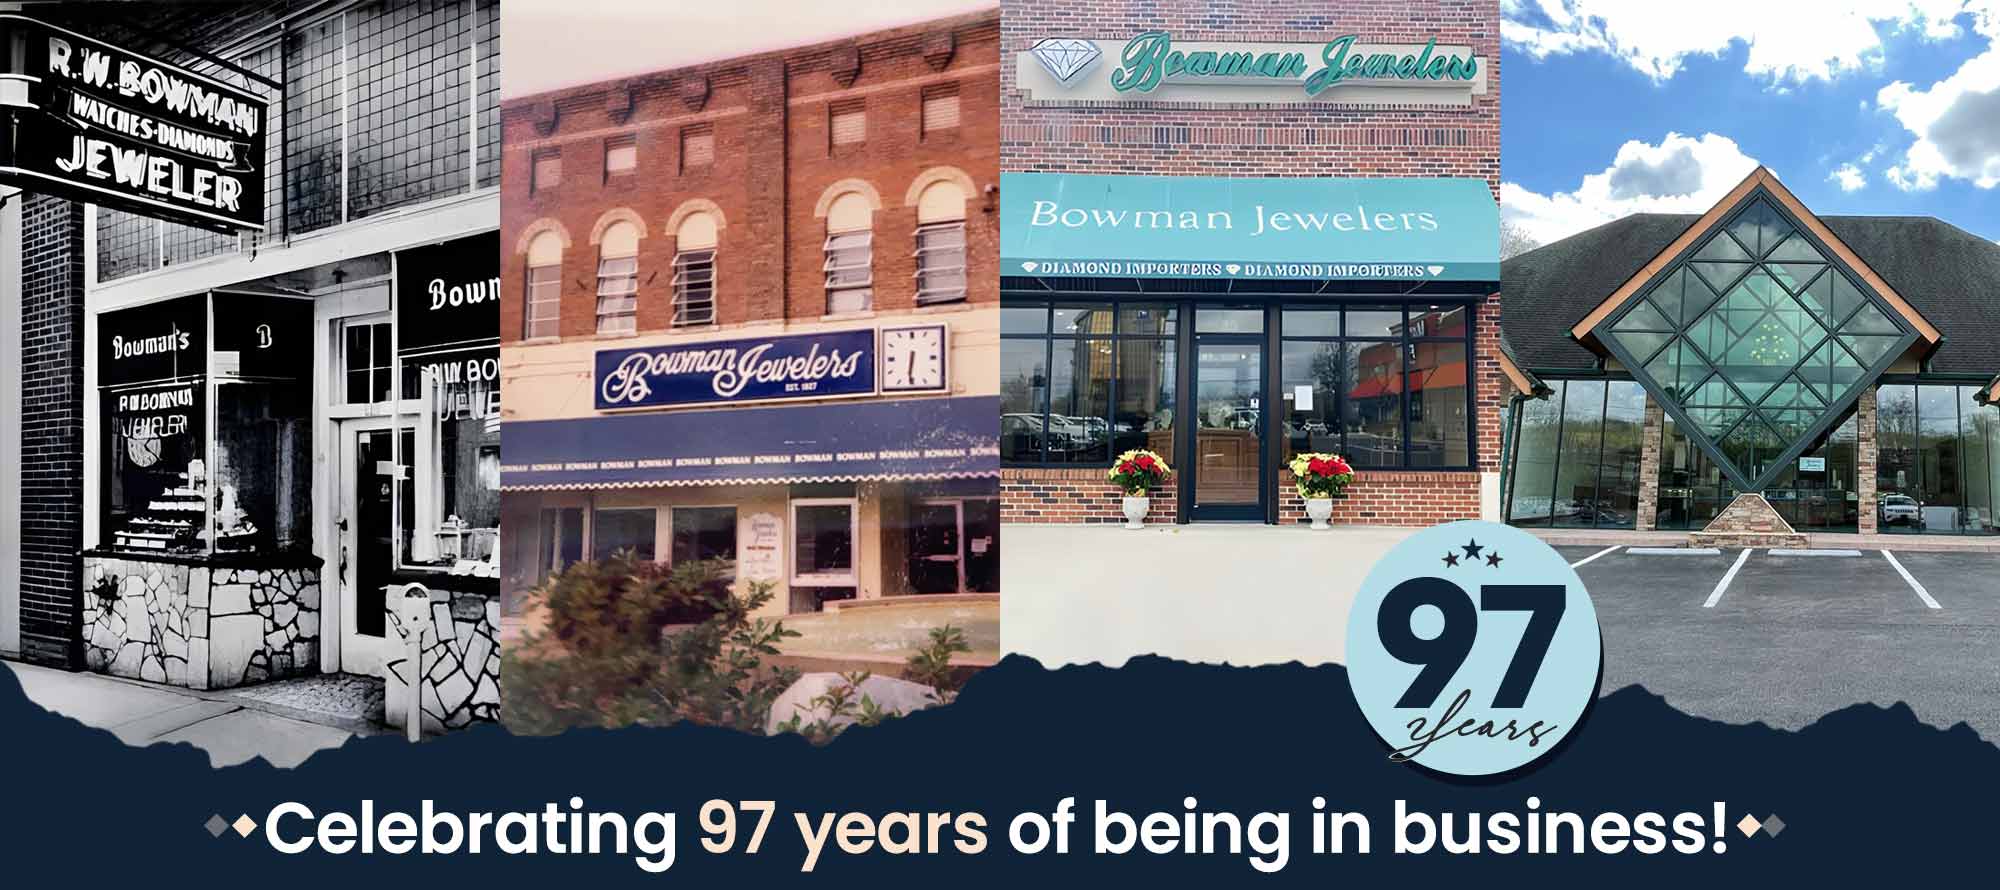 Bowman Jewelers Celebrating Ninety Seven Years in Business